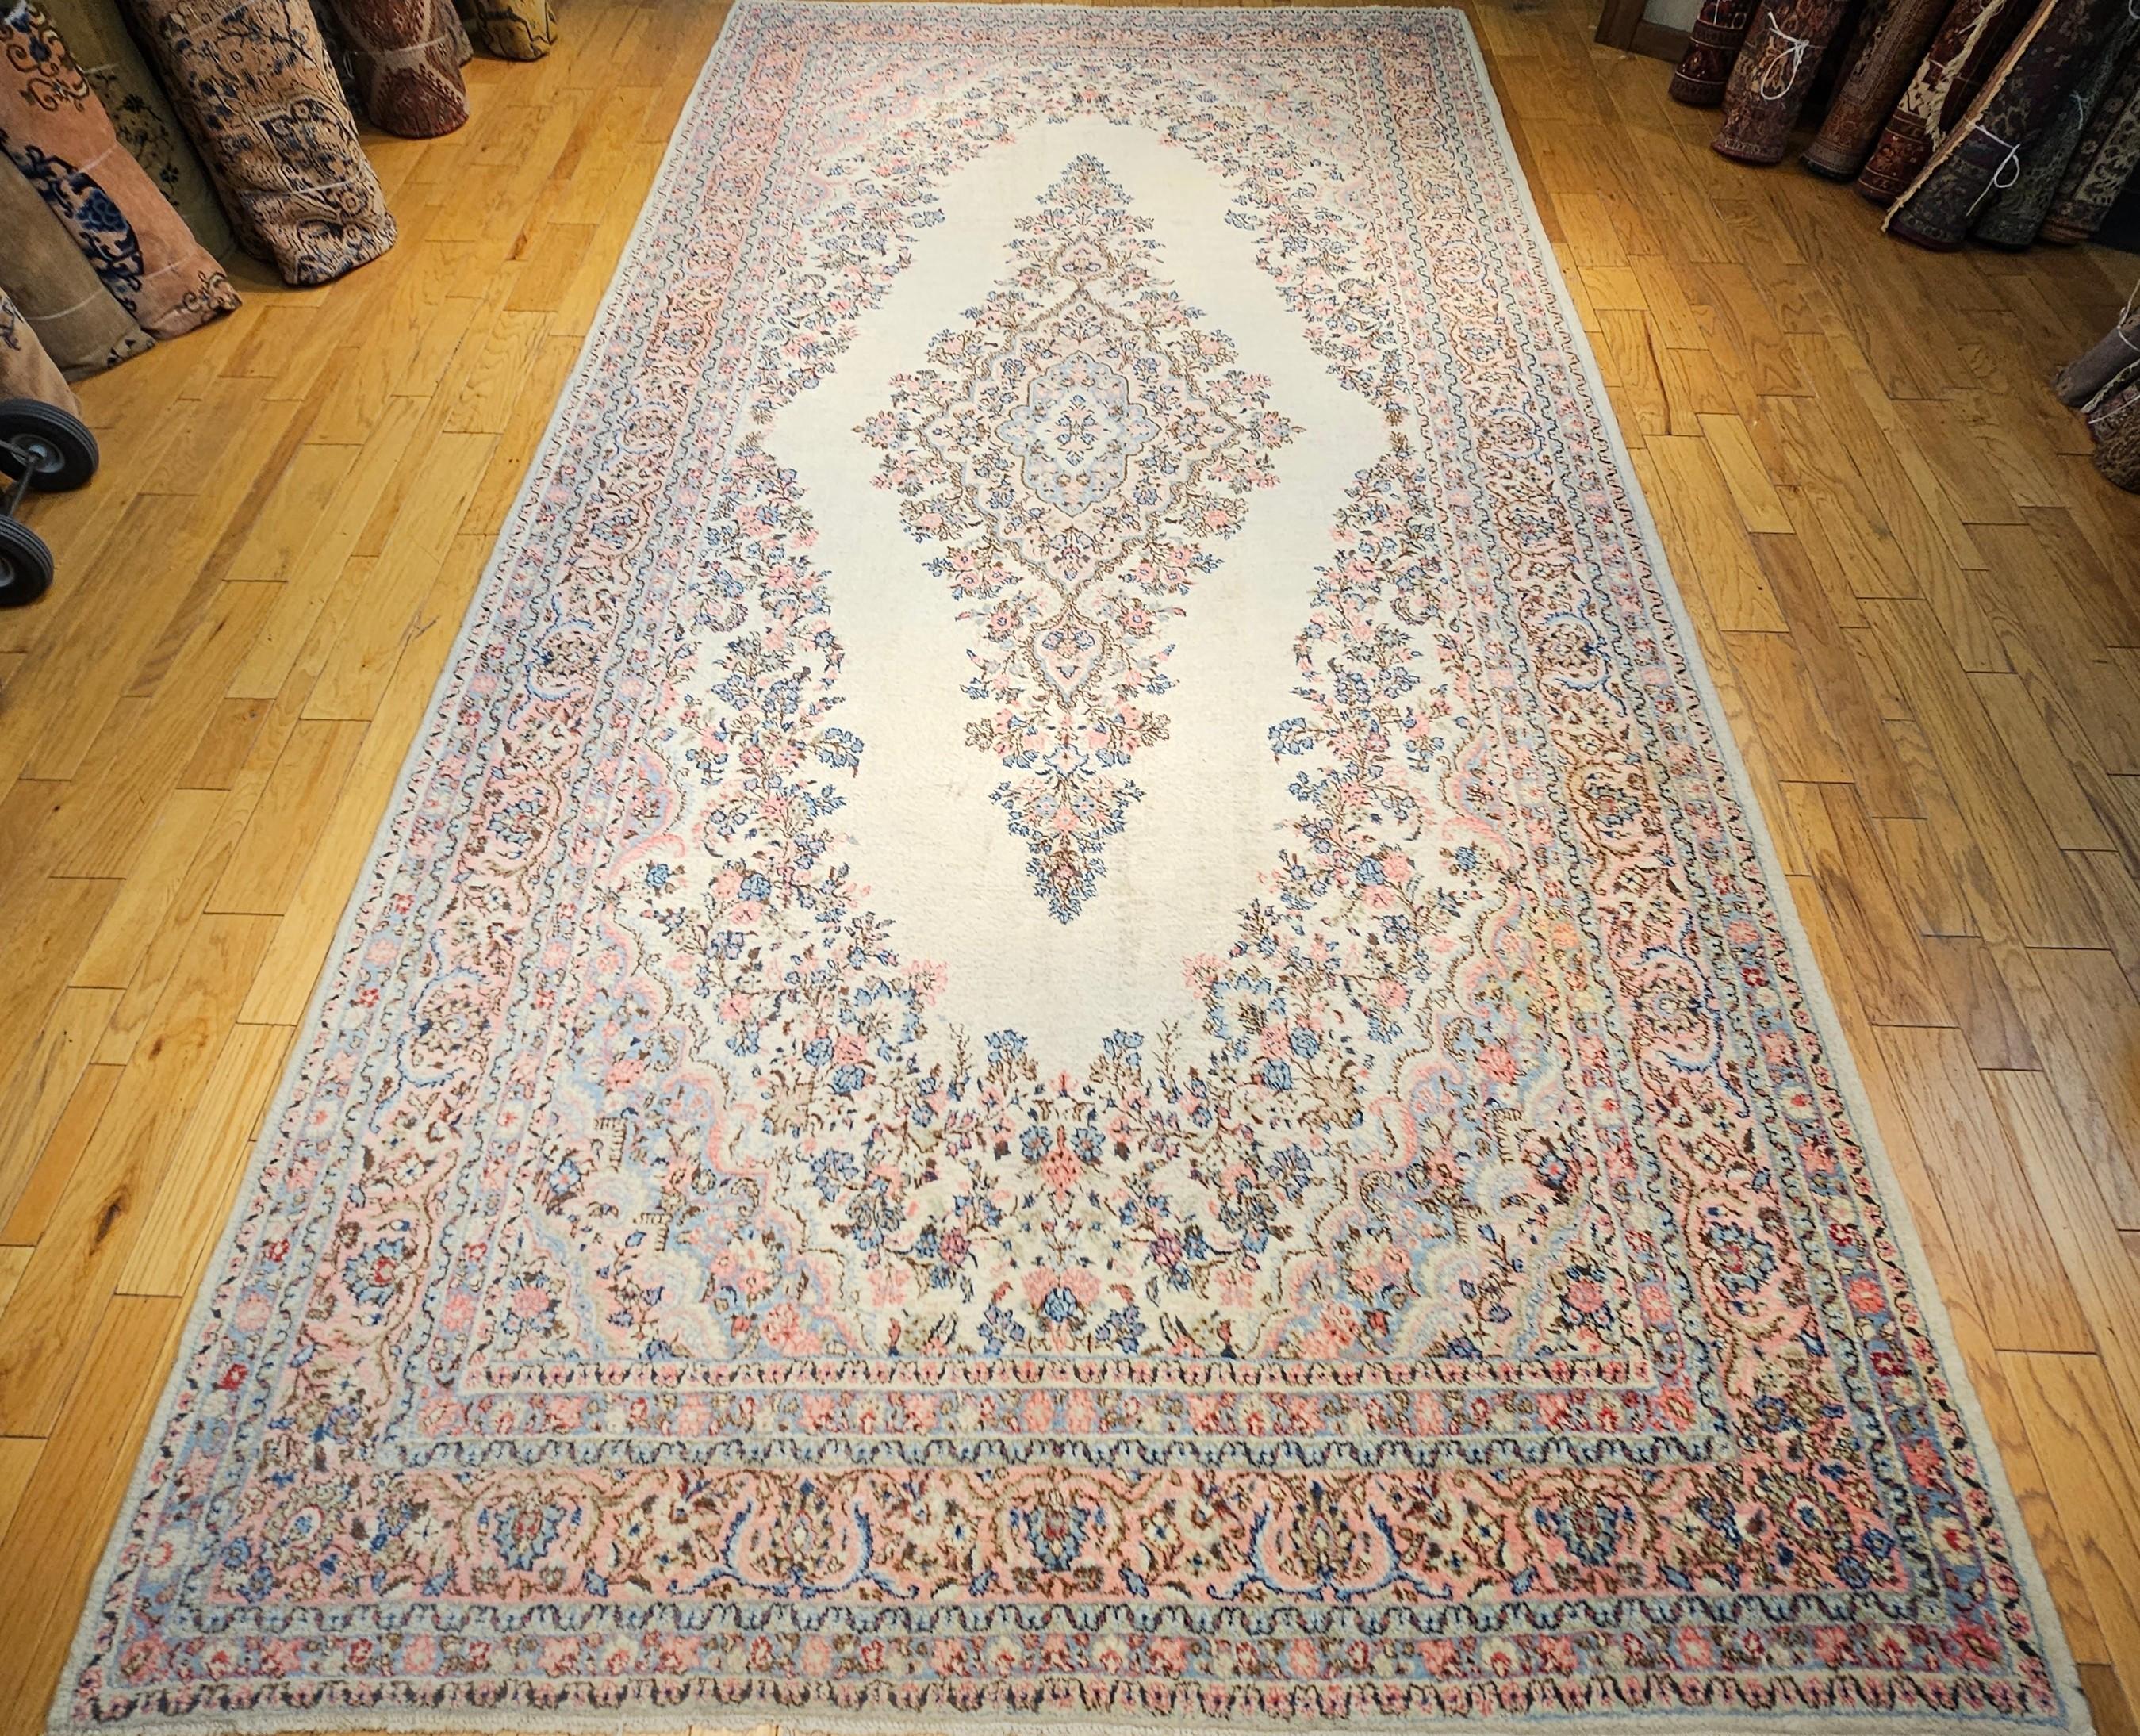 A beautiful oversized Persian Qazvin rug in a light cream field color with a central medallion with a floral design.  The design of this Qazvin is in the tradition of the Kerman rugs around the 2nd quarter of the 20th century.   This oversize Qazvin